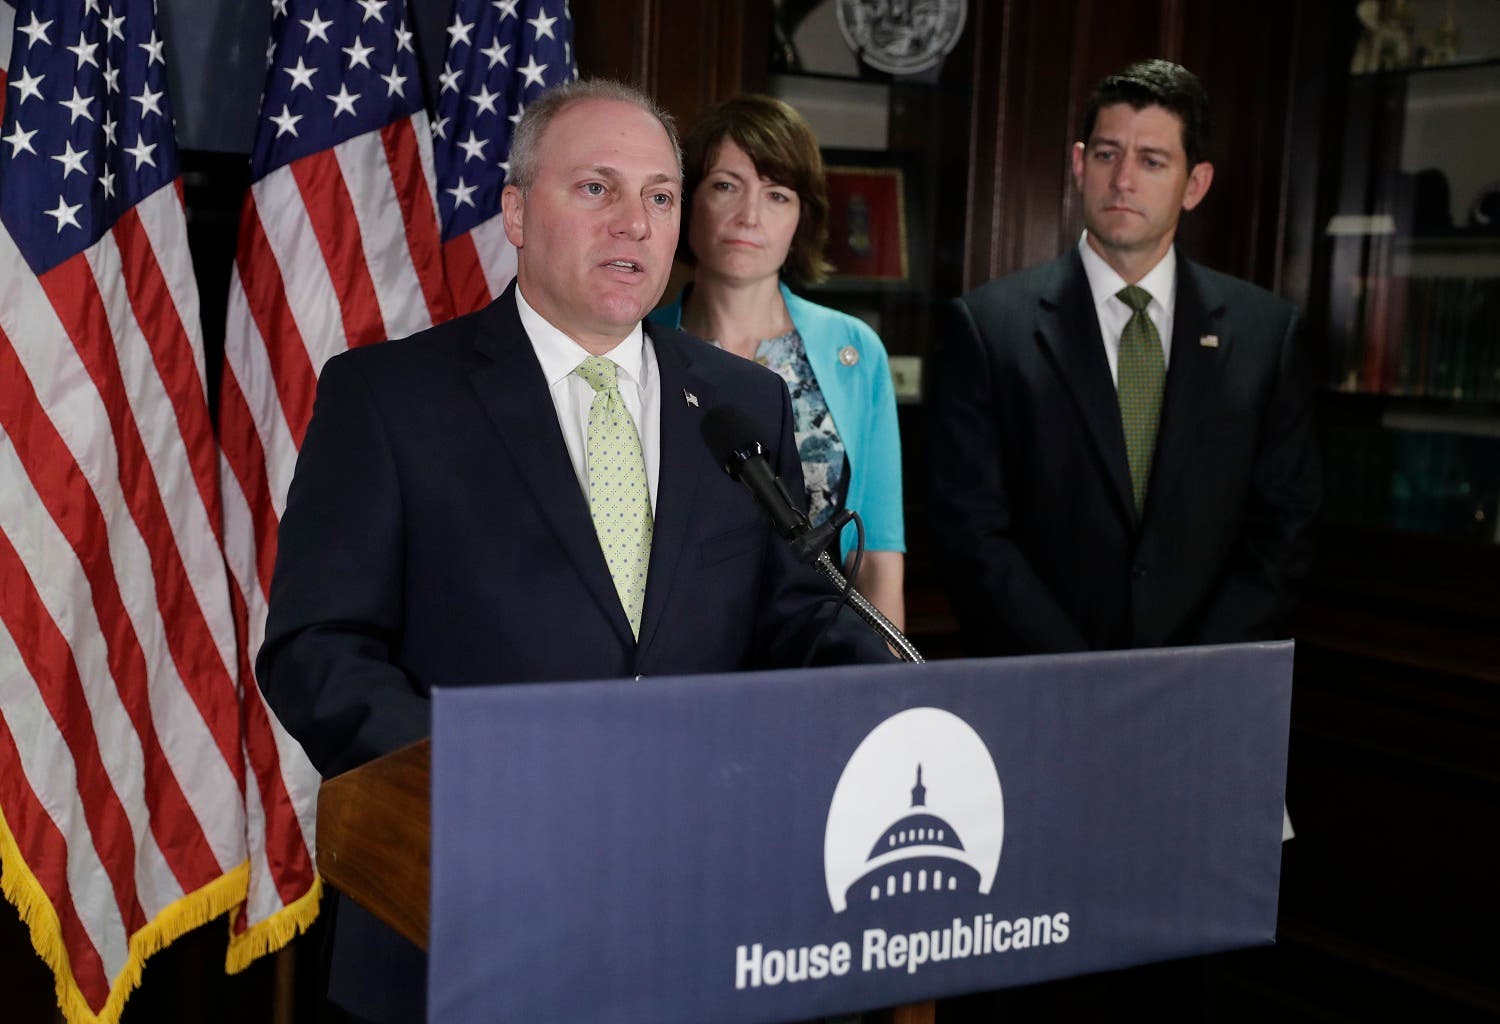 In a photo from June 13, 2017, House Majority Whip Steve Scalise, R-La., joined by Speaker of the House Paul Ryan,(far right), and Rep. Cathy McMorris Rodgers, during a news conference at Republican National Committee Headquarters on Capitol Hill in Washington. (AP)